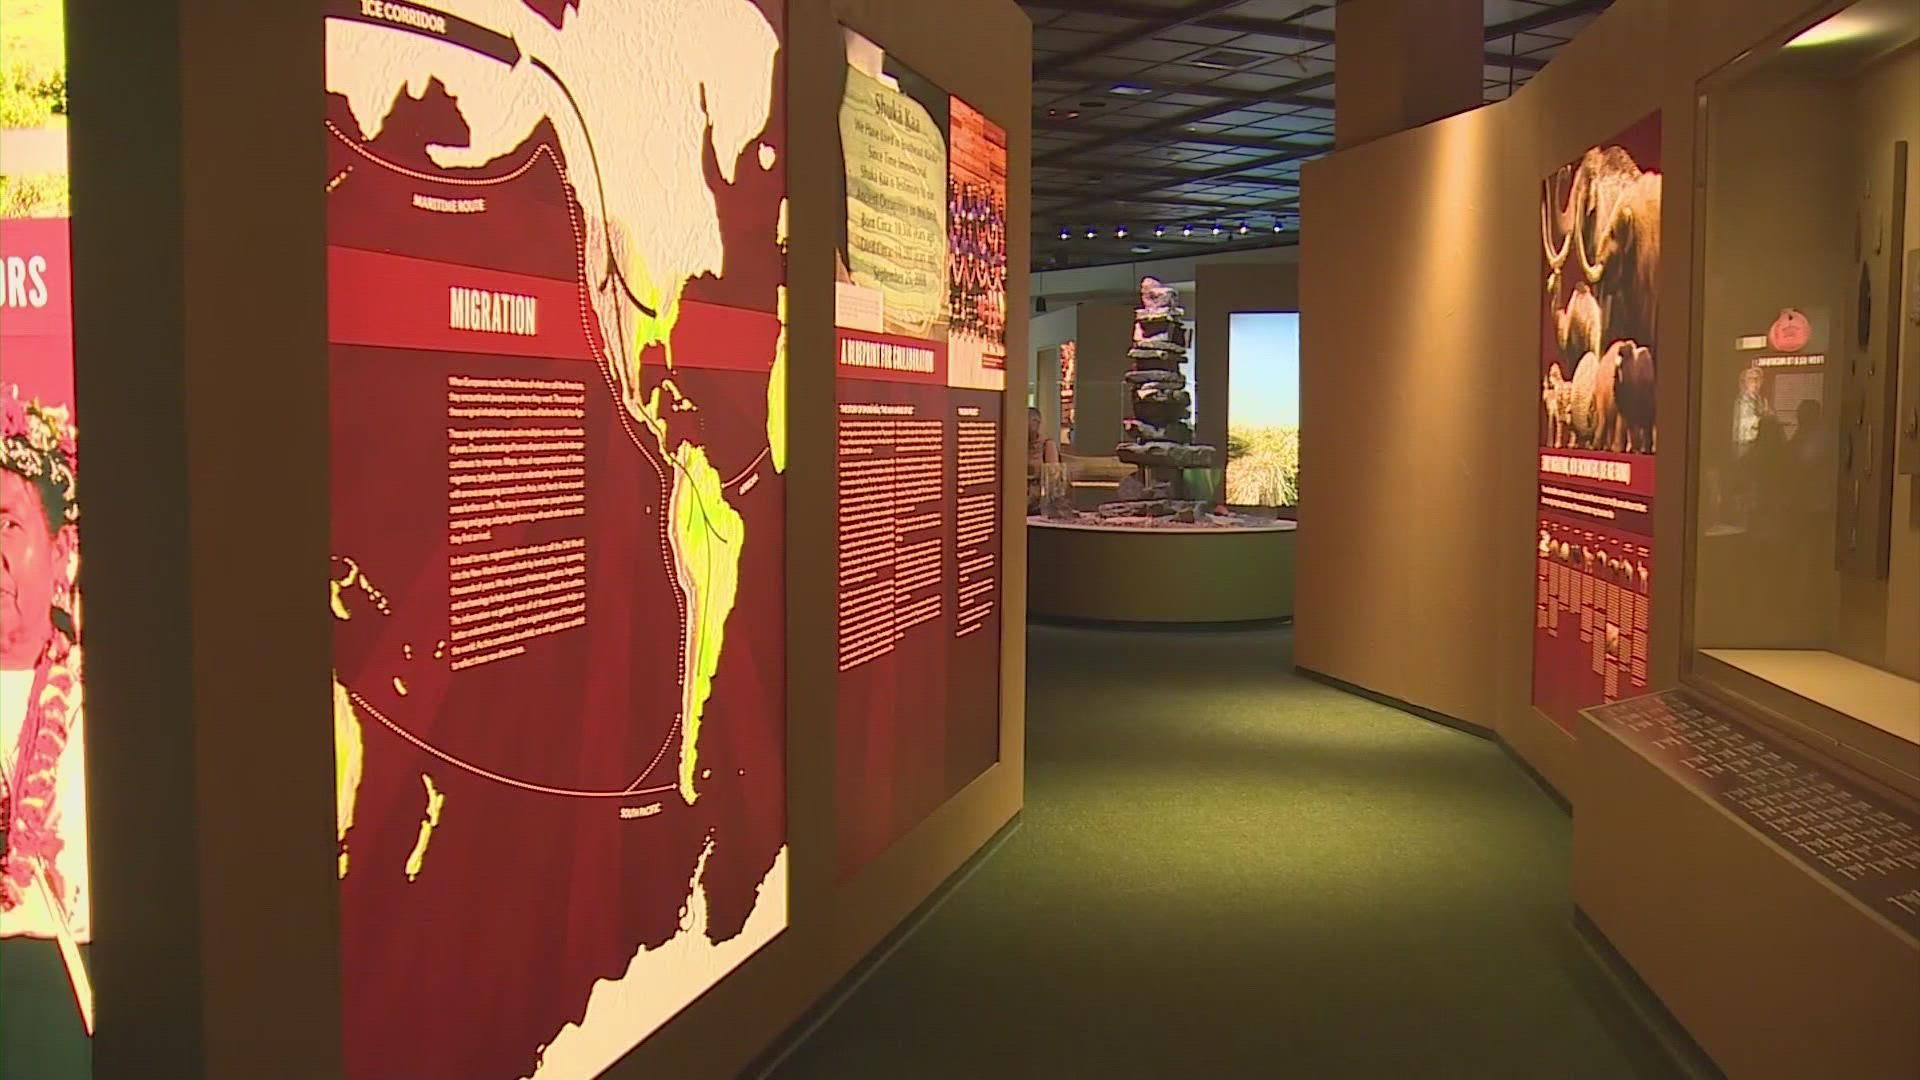 Houston Museum of Natural Science has opened its John P. McGovern Hall of The Americas exhibit. Photojournalist Erik Darelius gives us an inside look.